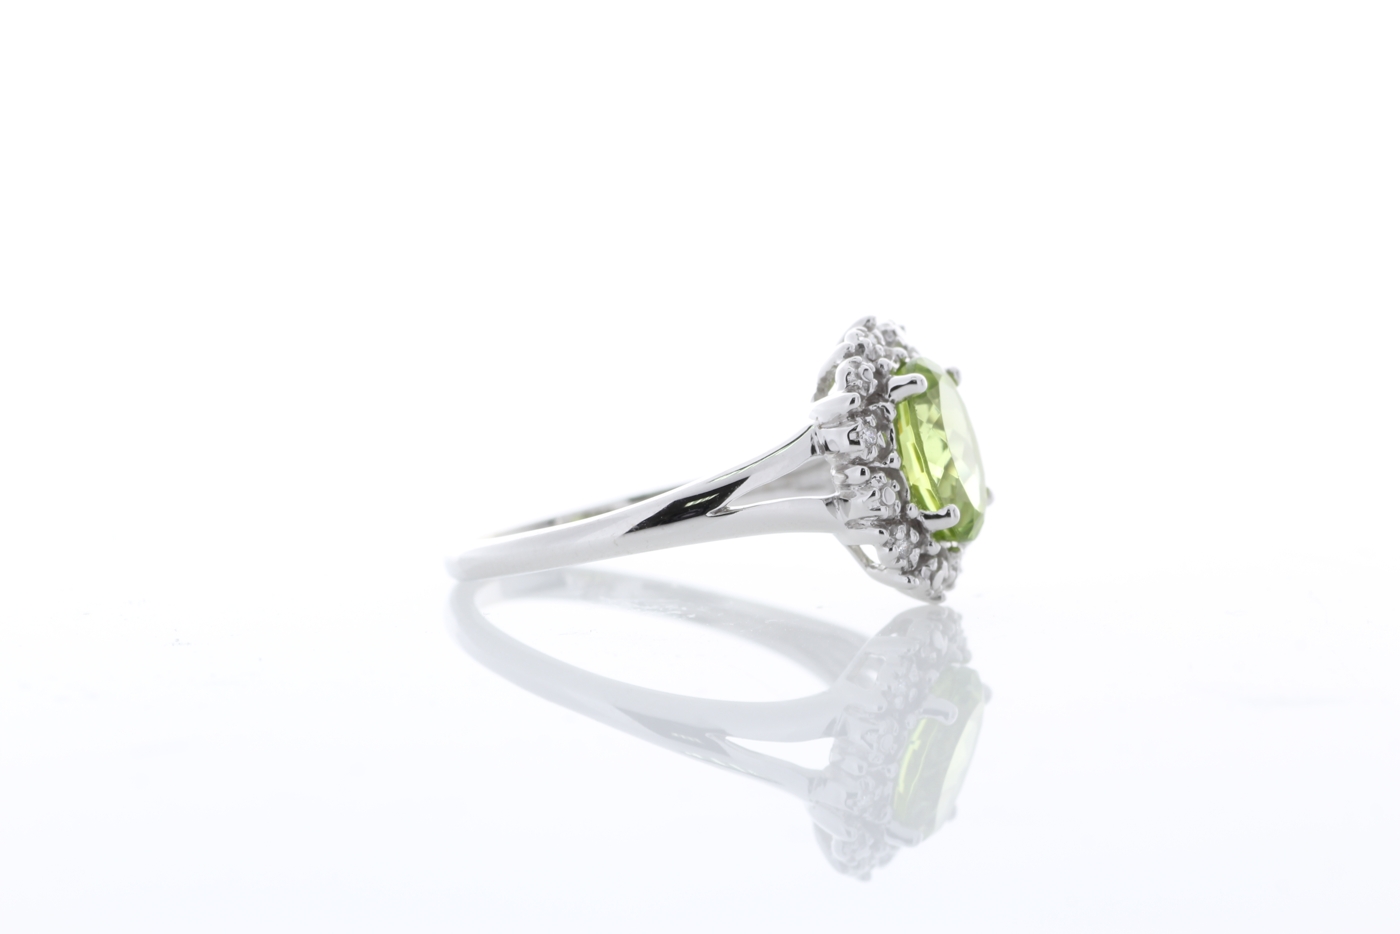 9ct White Gold Cluster Diamond And Peridot Ring 1.40 Carats - Image 4 of 7